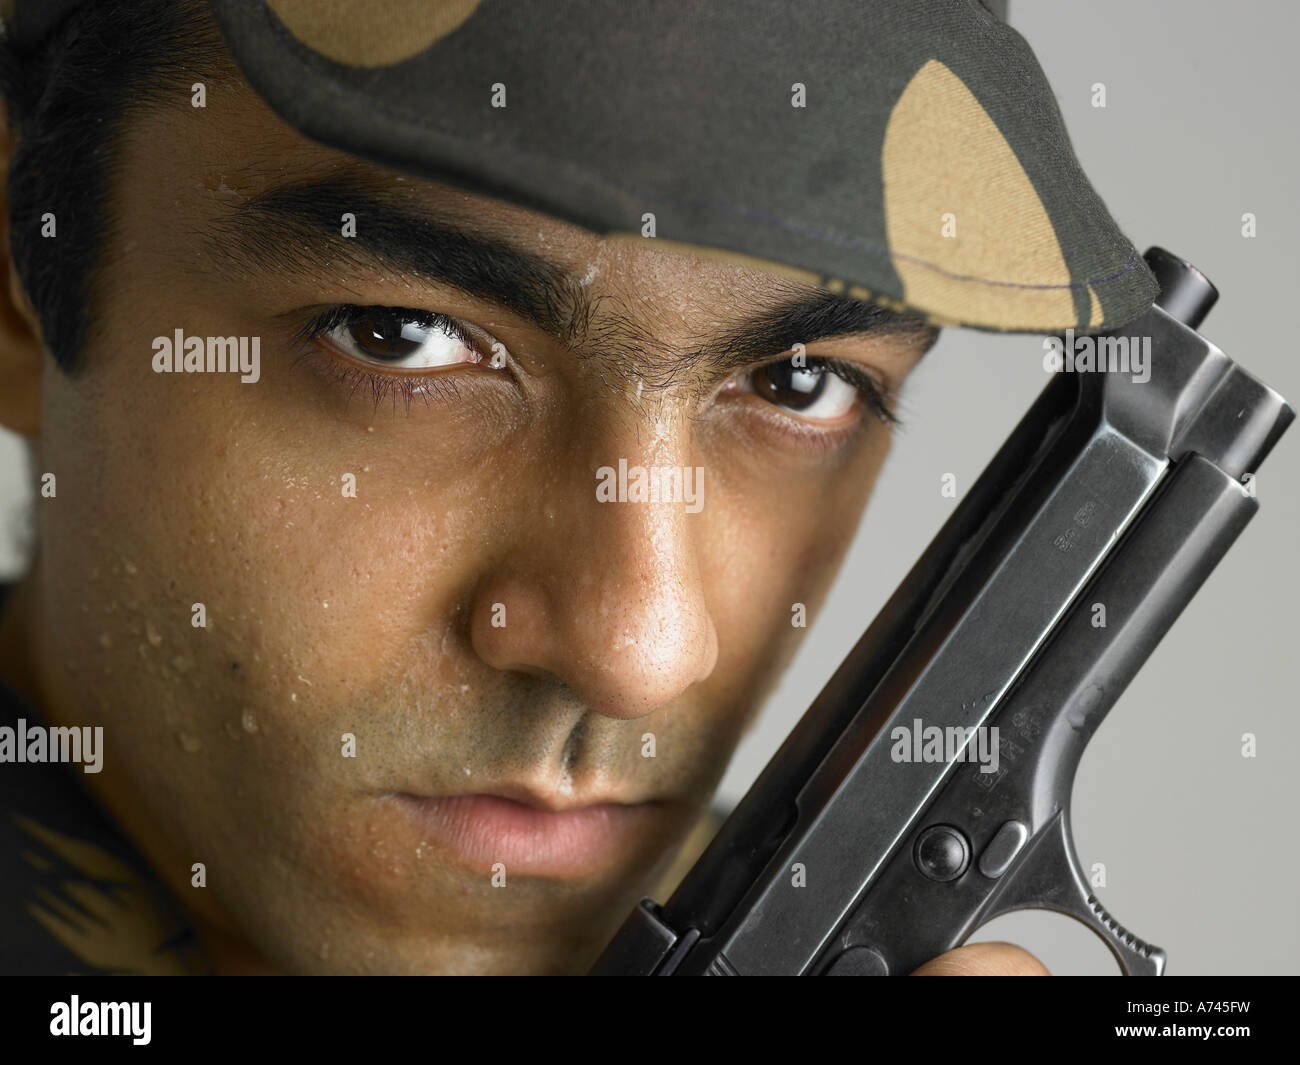 VDA 201756 Indian army soldier in angry expression holding handgun MR 702A Stock Photo